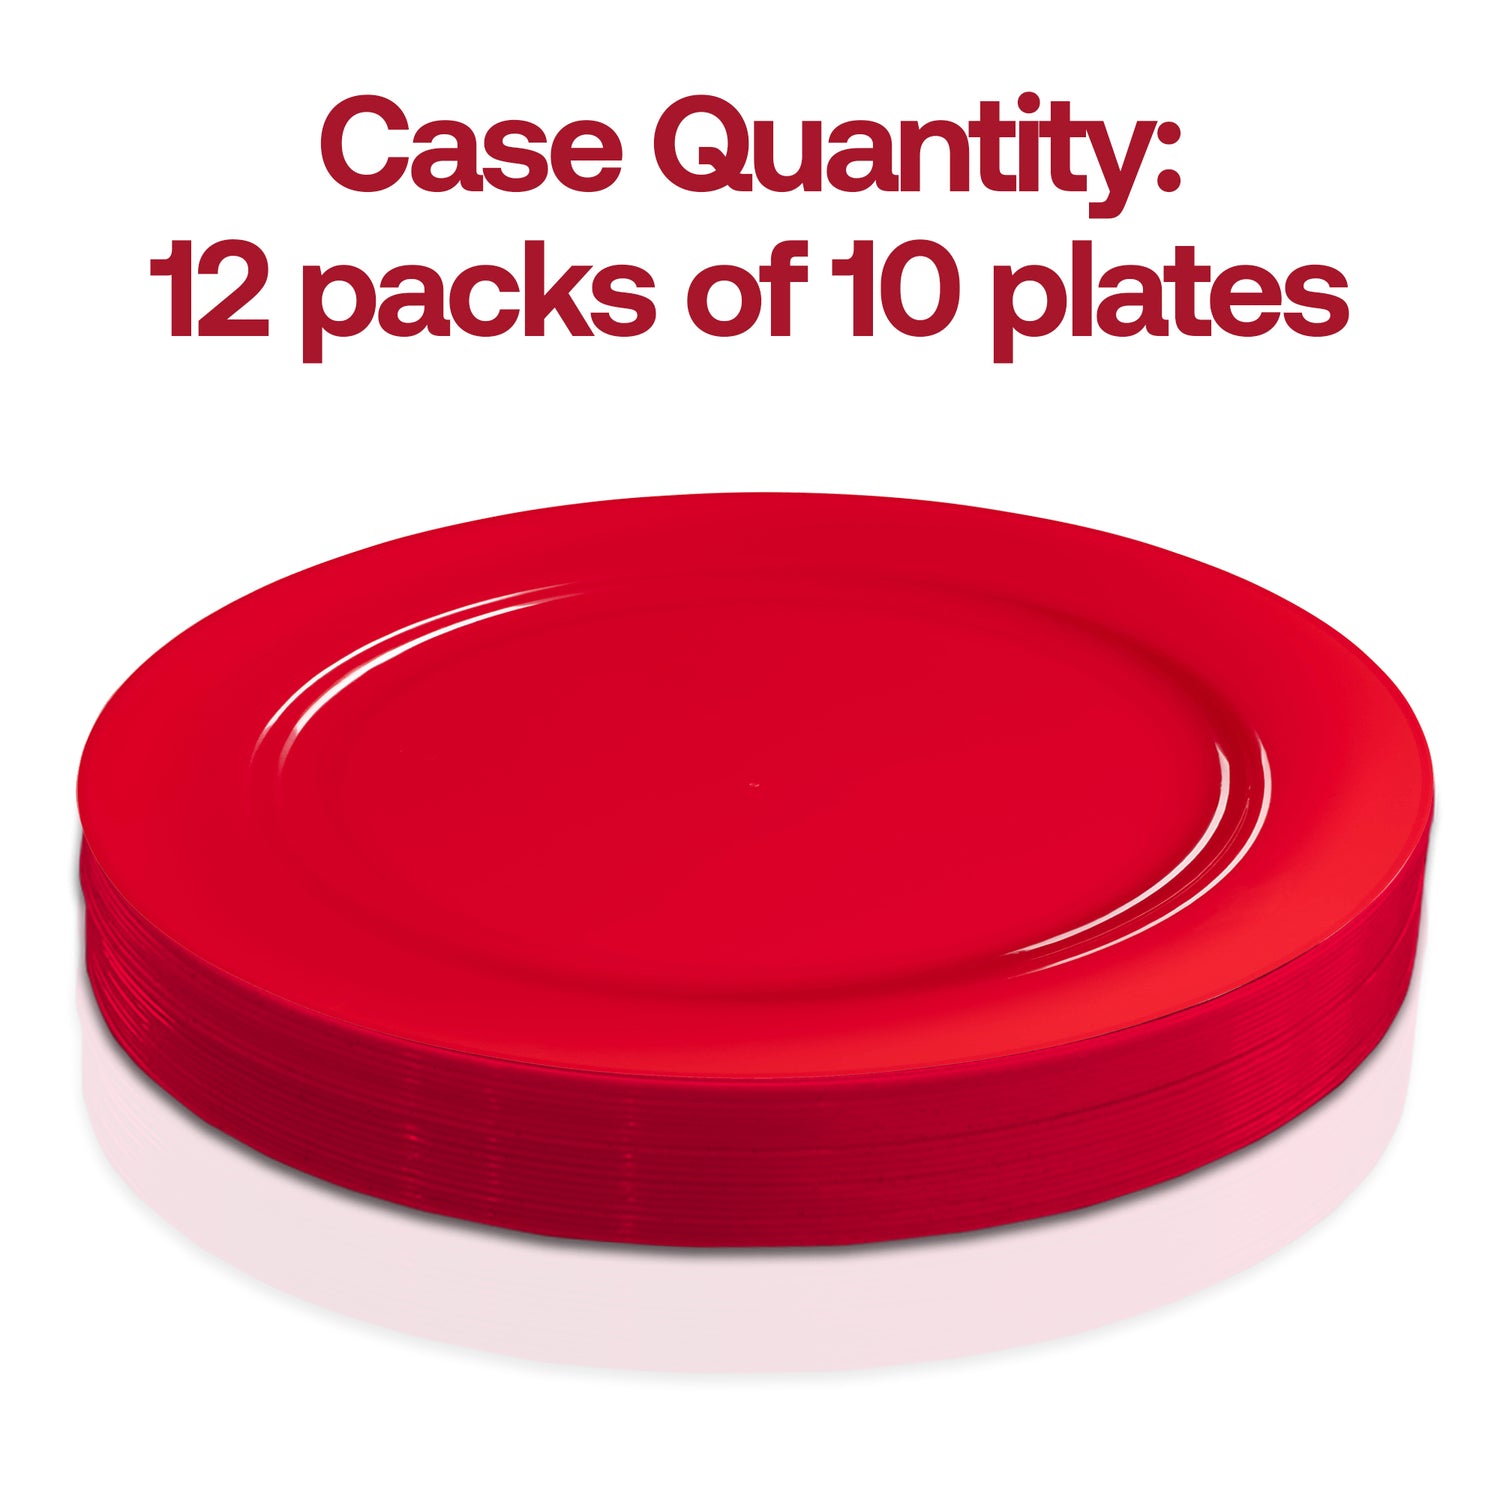 Solid Red Holiday Round Disposable Plastic Appetizer/Salad Plates (7.5") Quantity | The Kaya Collection